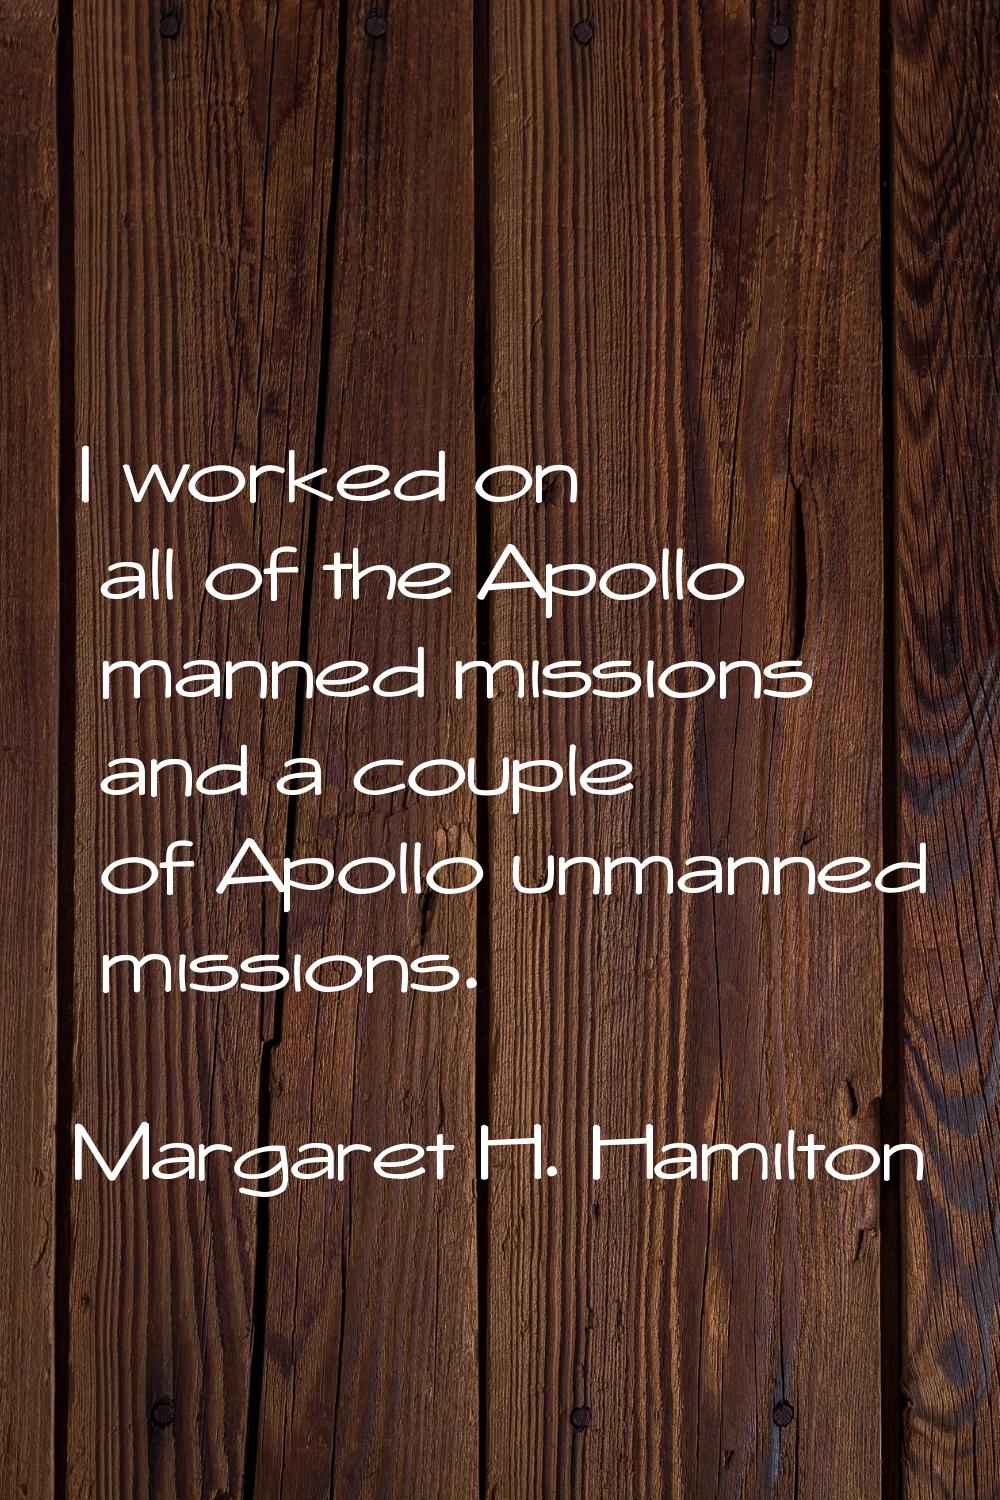 I worked on all of the Apollo manned missions and a couple of Apollo unmanned missions.